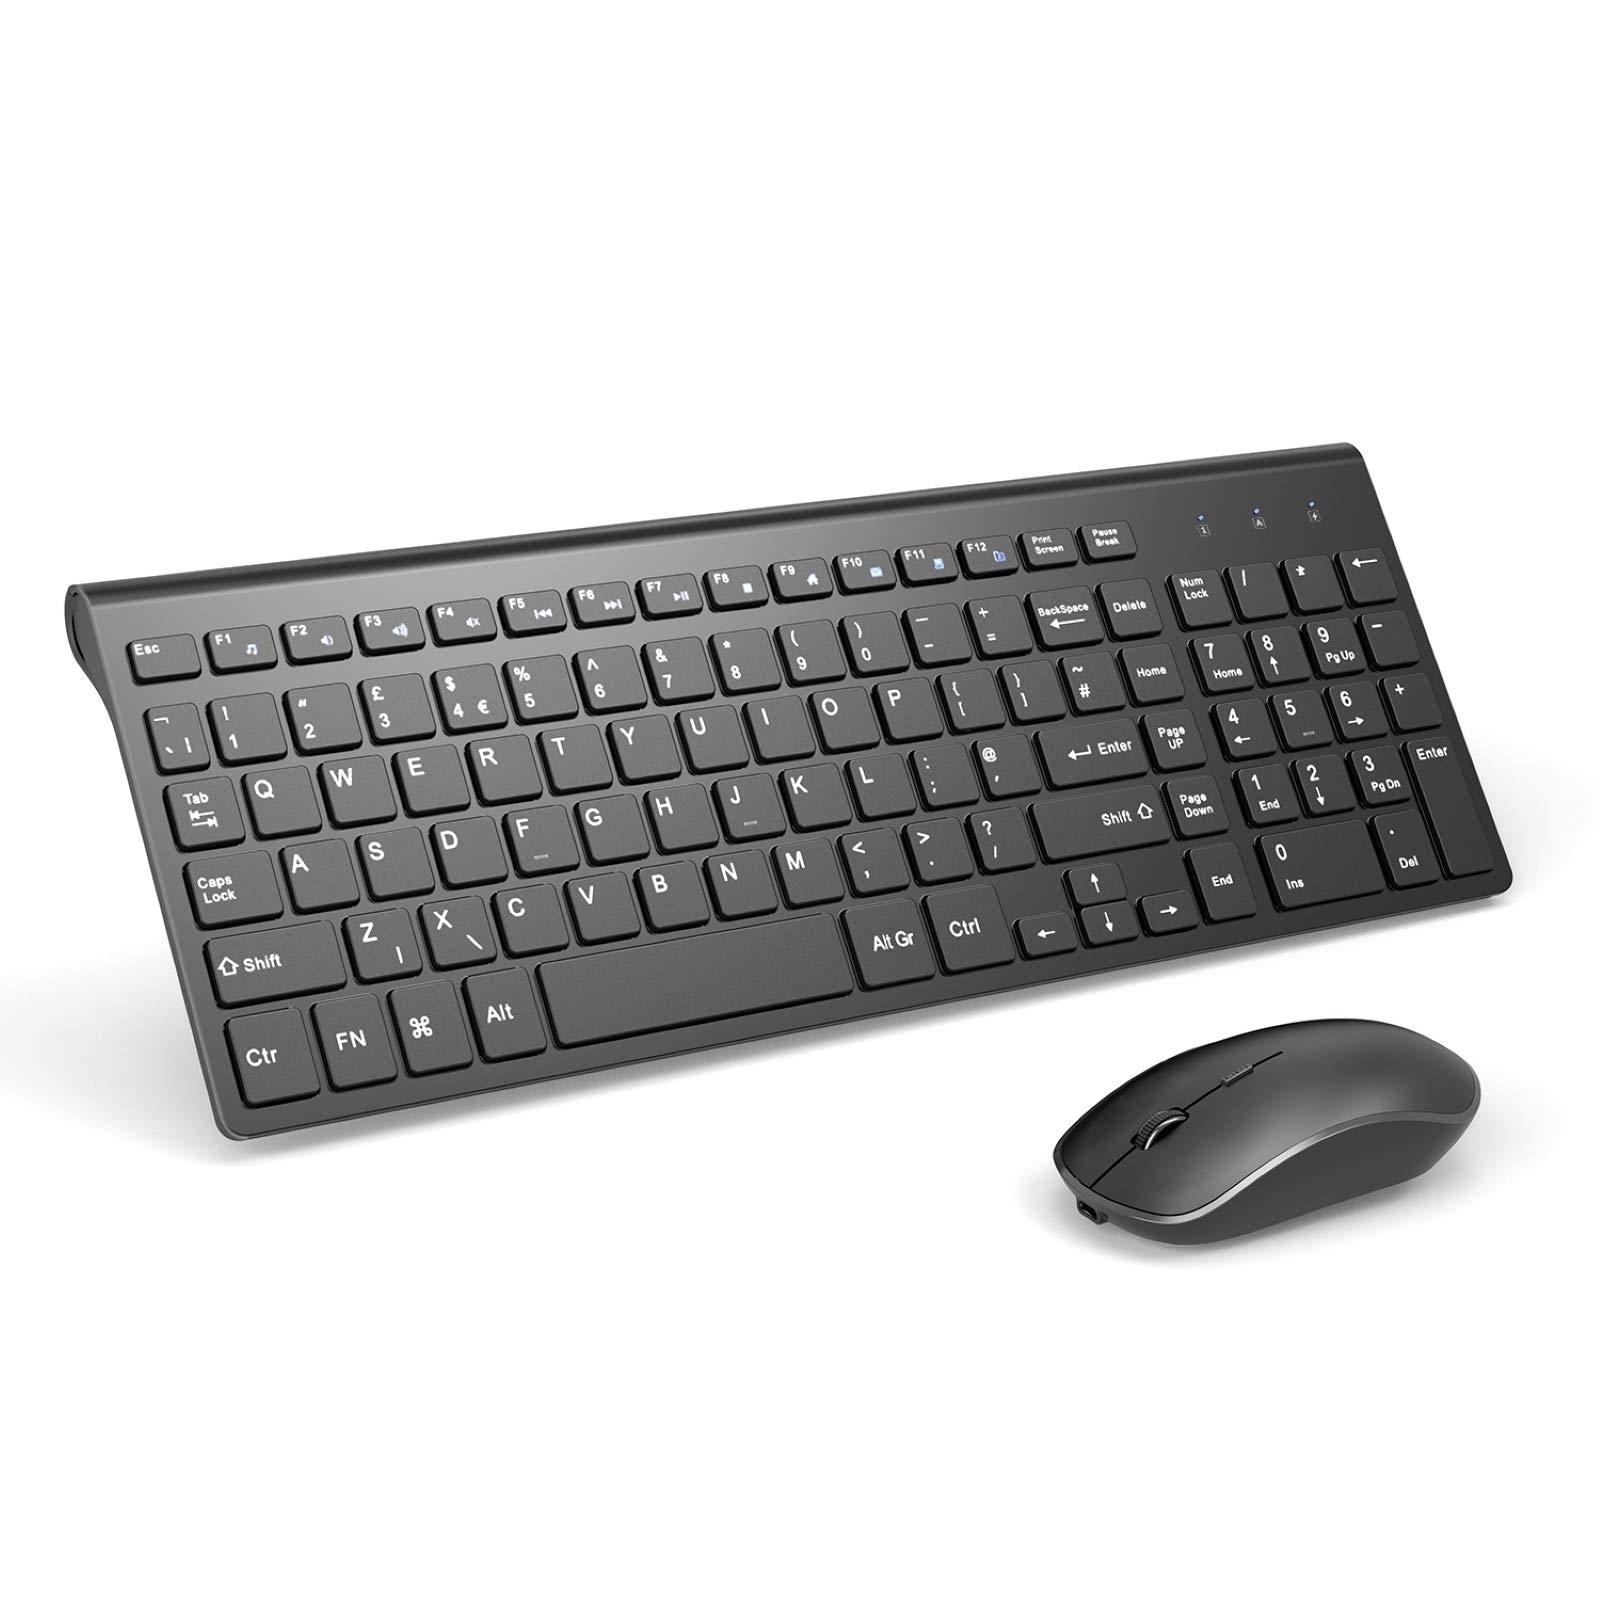 Rechargeable Wireless Keyboard and Mouse Combo- J JOYACCESS 2.4G Full Size Portable Keyboard and Mouse Ergonomic, Quiet Click Compact Design for Laptop,PC,Desktop,Computer,Windows- Black
